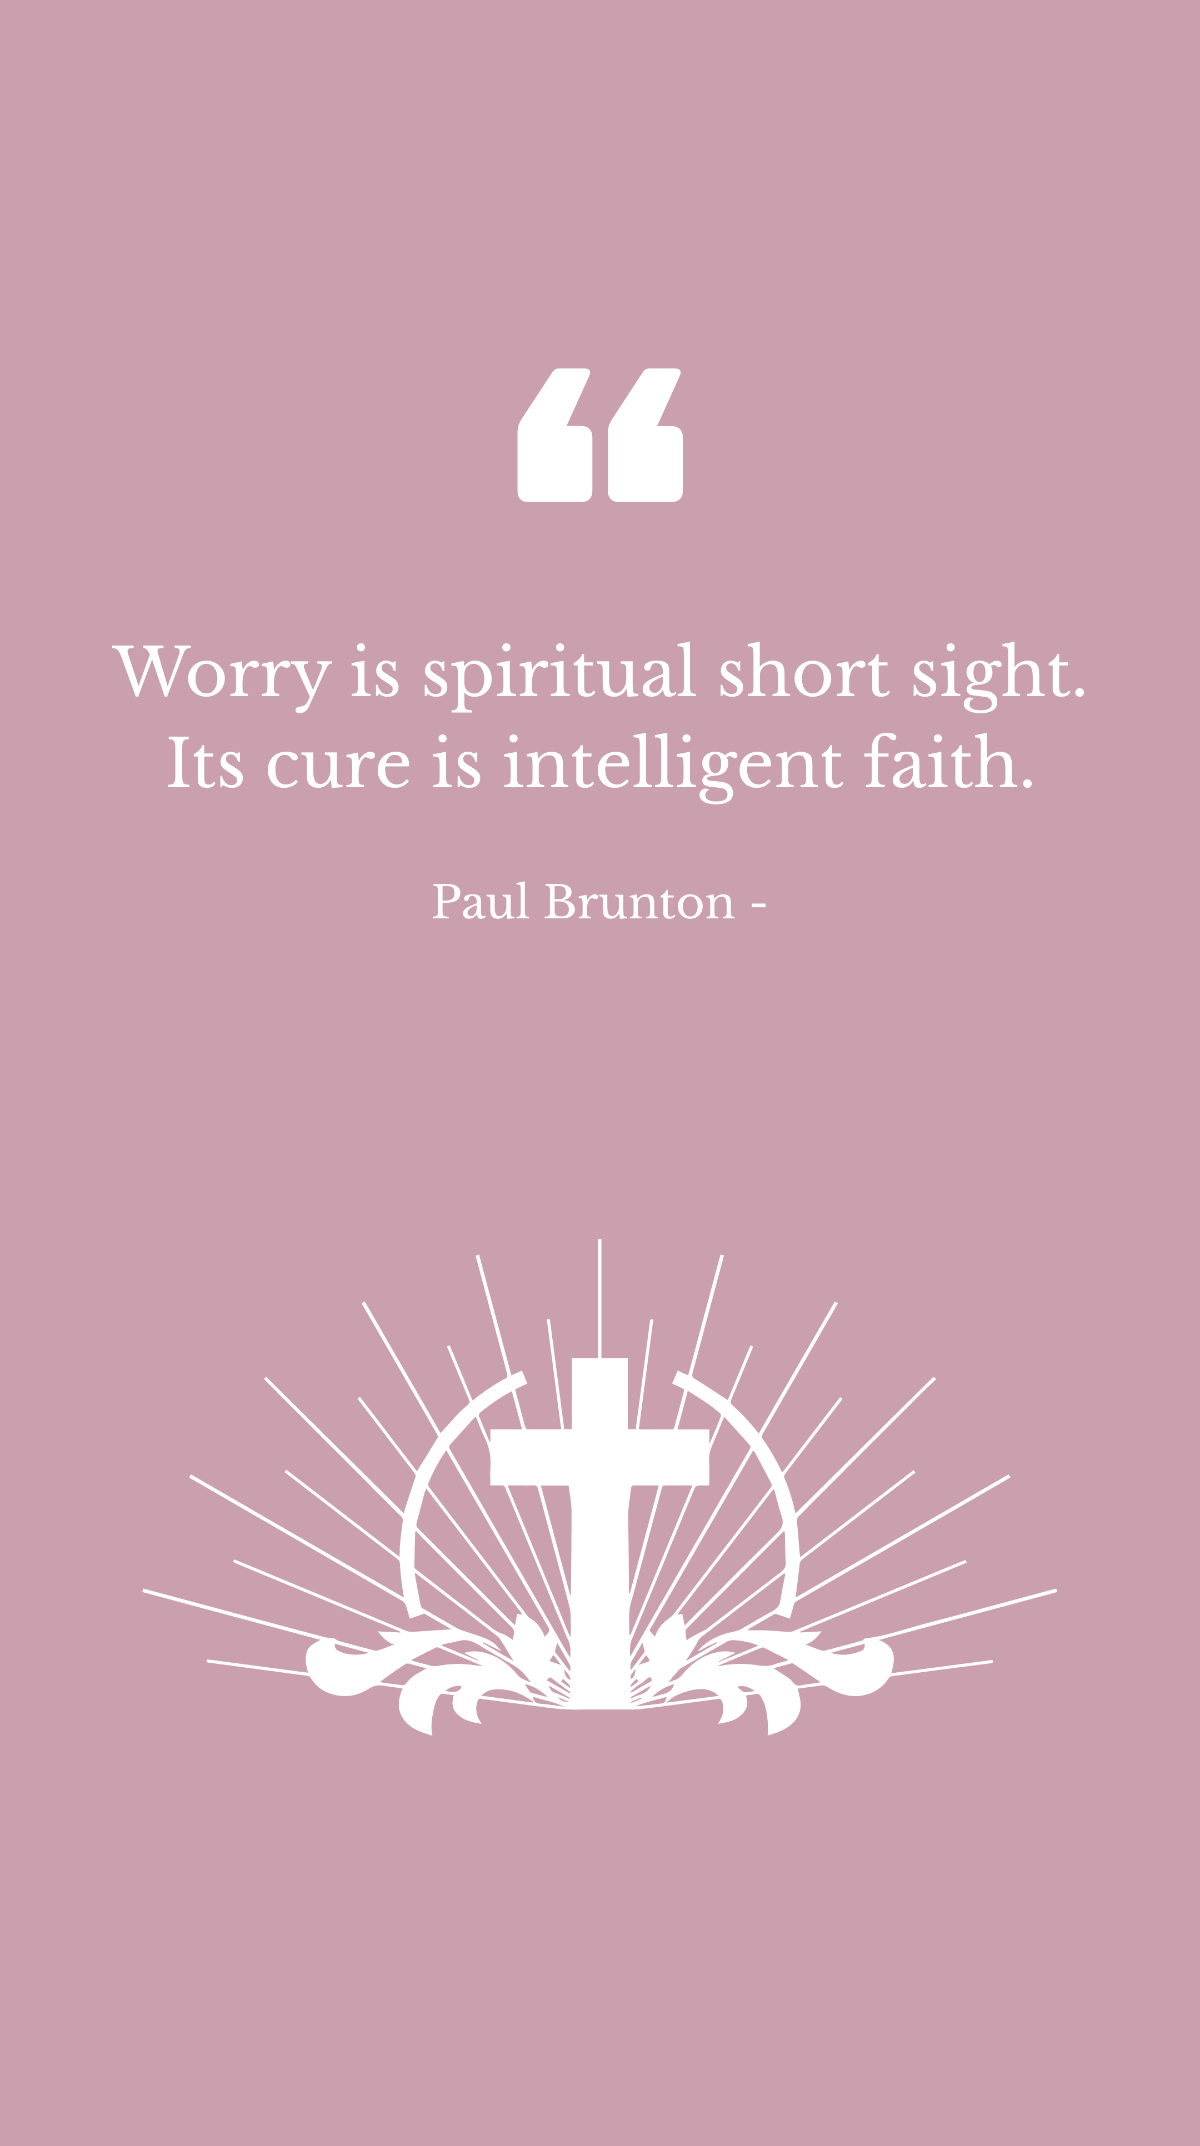 Paul Brunton - Worry is spiritual short sight. Its cure is intelligent faith. Template